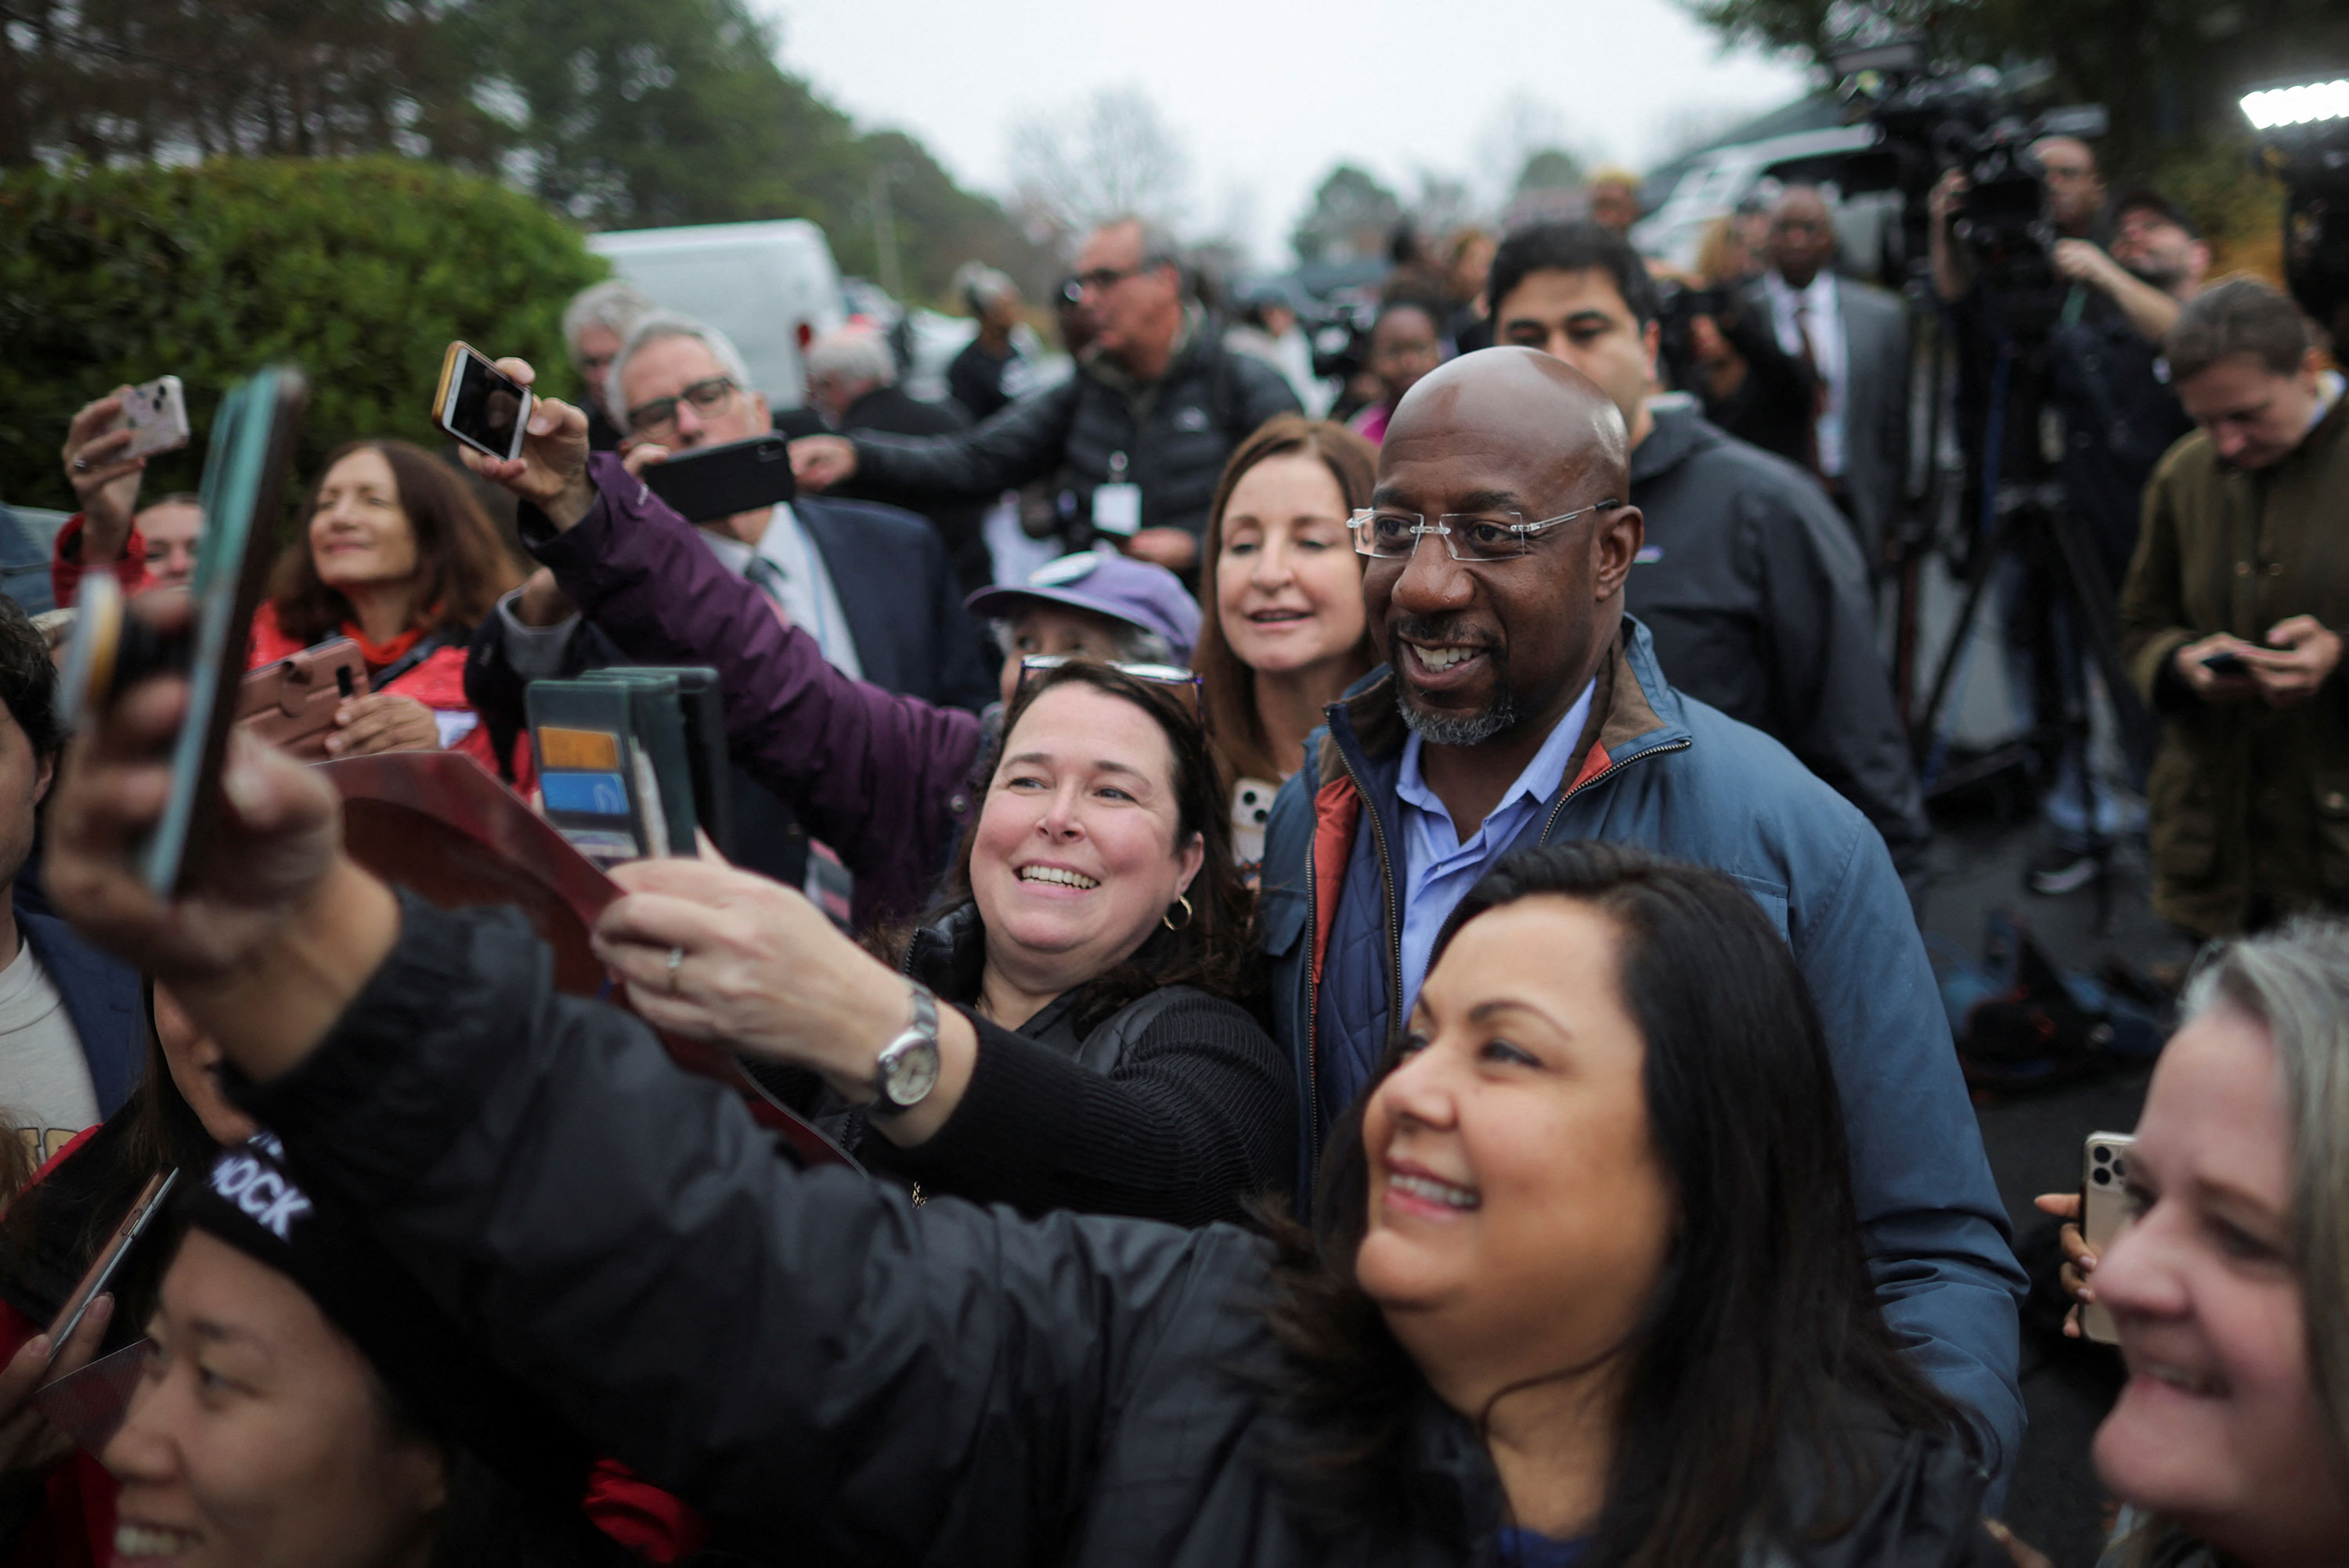 Sen. Raphael Warnock poses for a picture with supporters during a visit at a campaign office in Norcross, Georgia, on Tuesday.